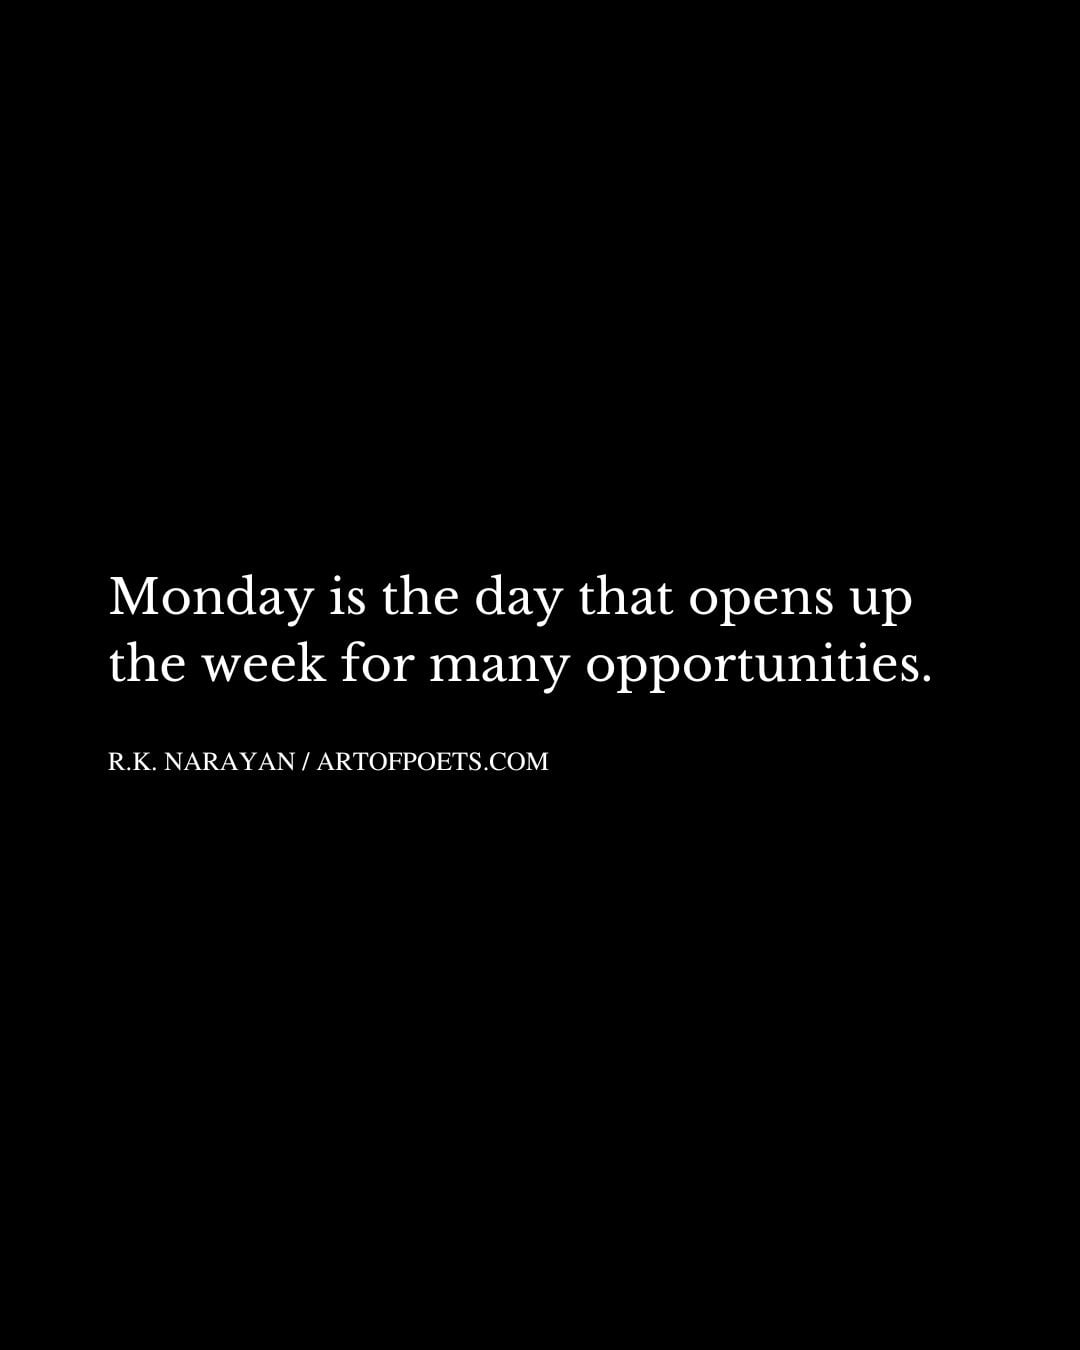 Monday is the day that opens up the week for many opportunities